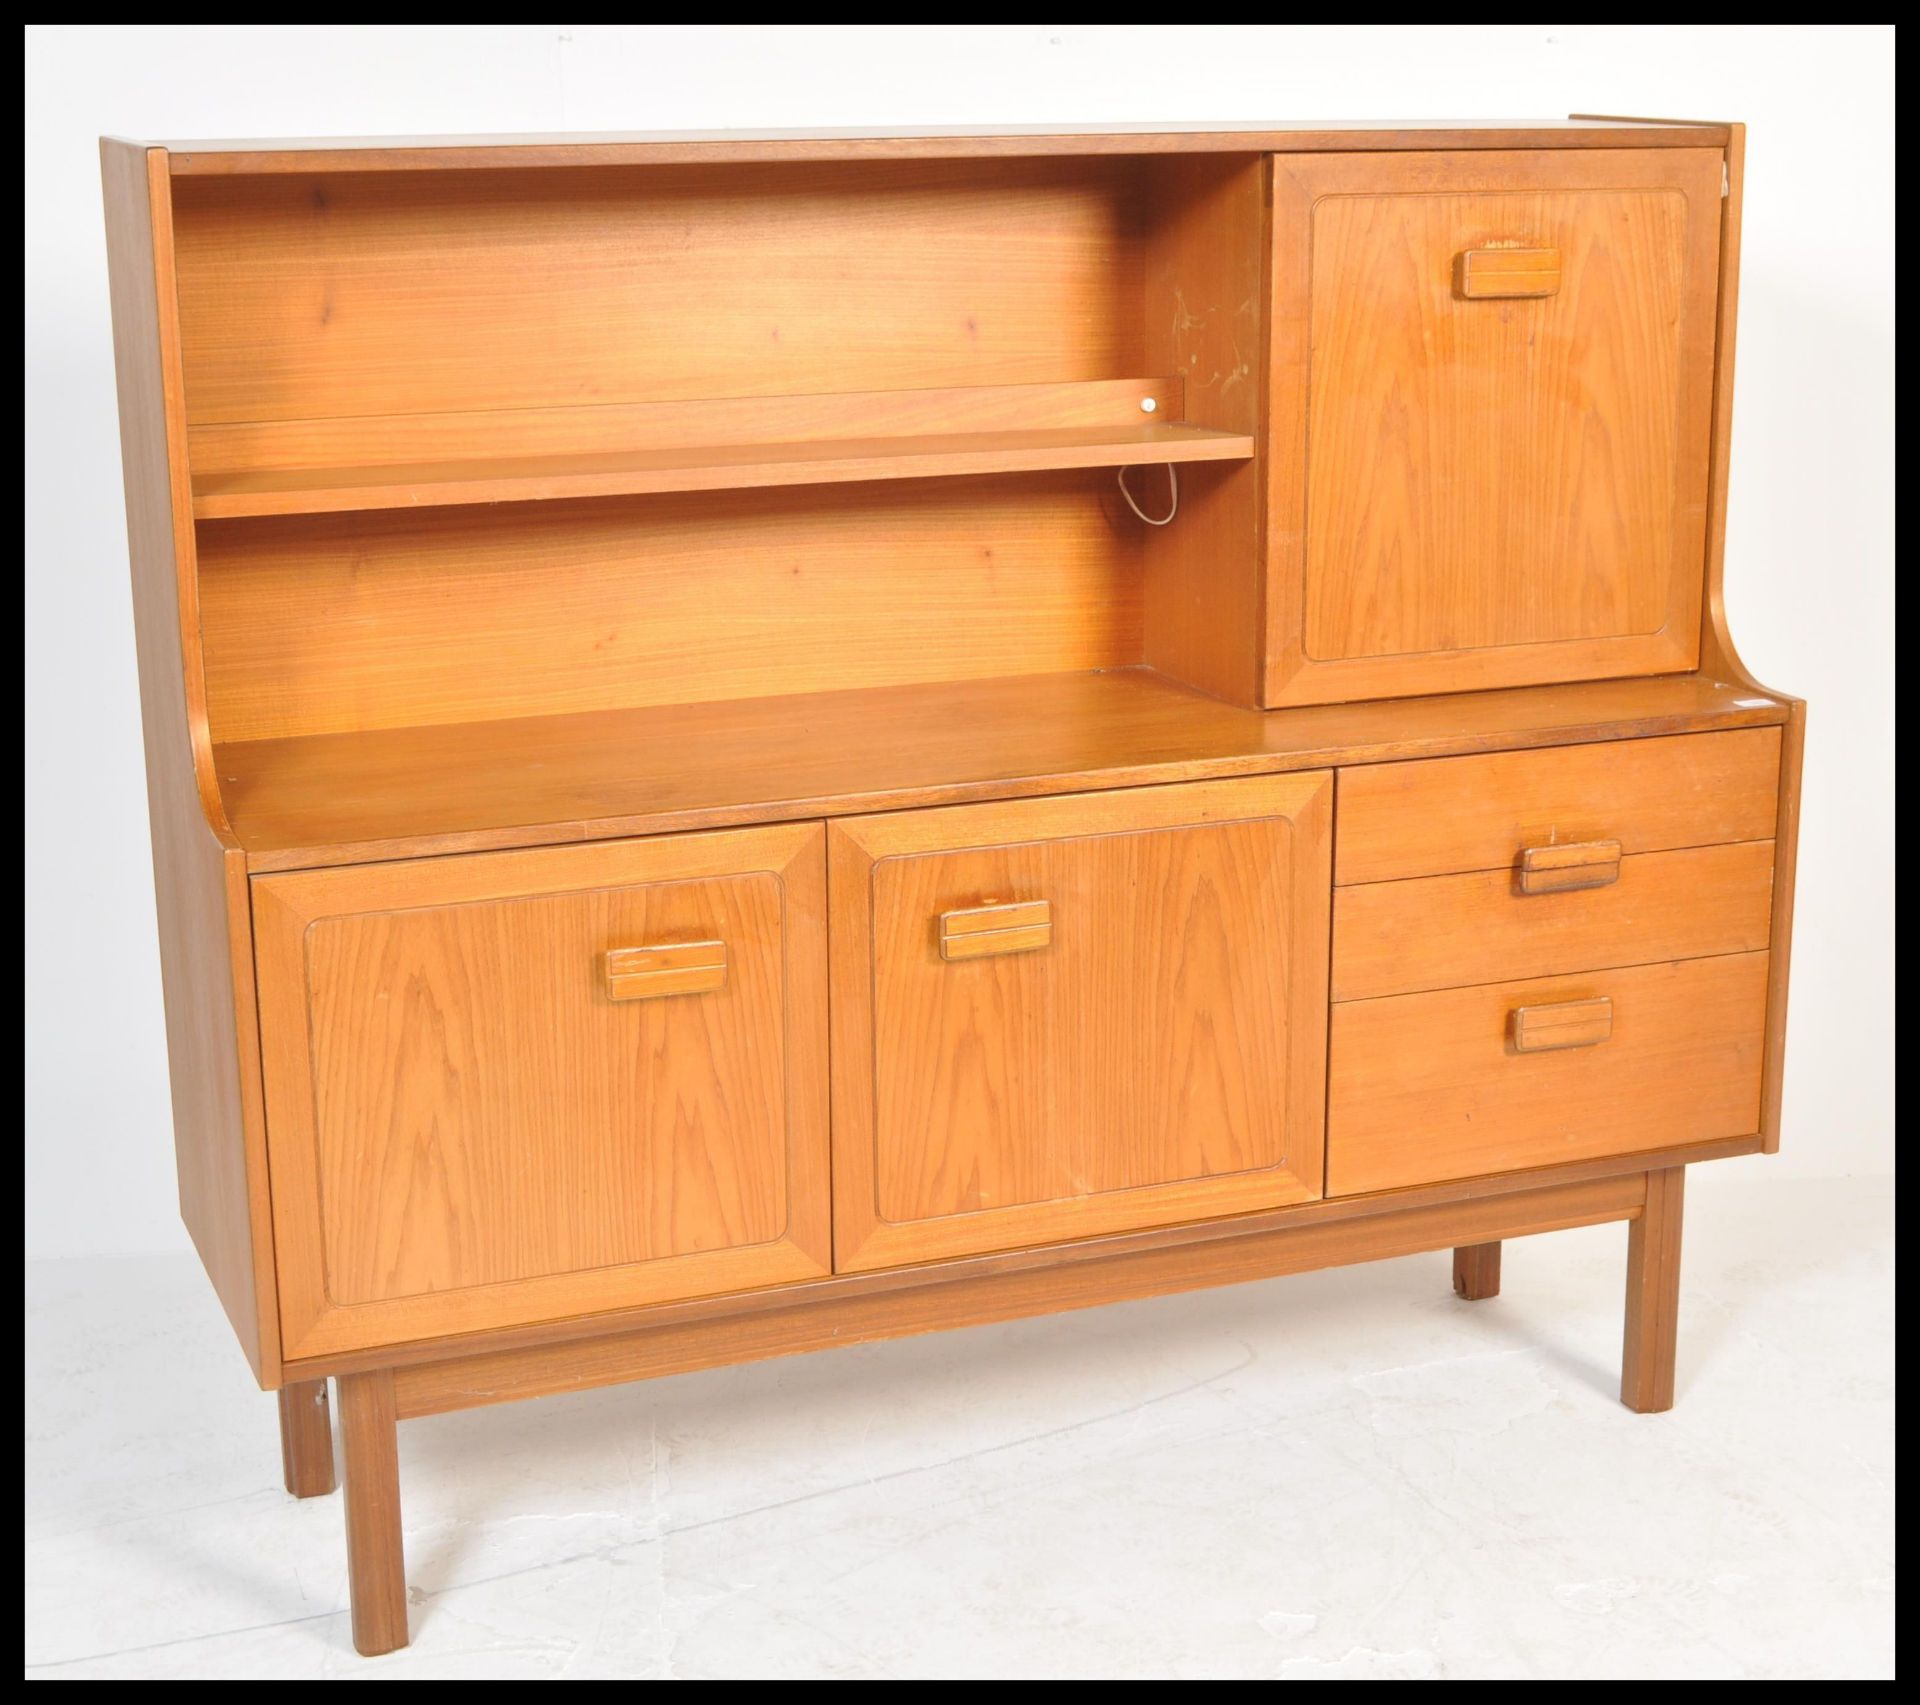 A retro 20th Century teak wood highboard sideboard credenza by Alfred Cox having an arrangement of - Image 2 of 6